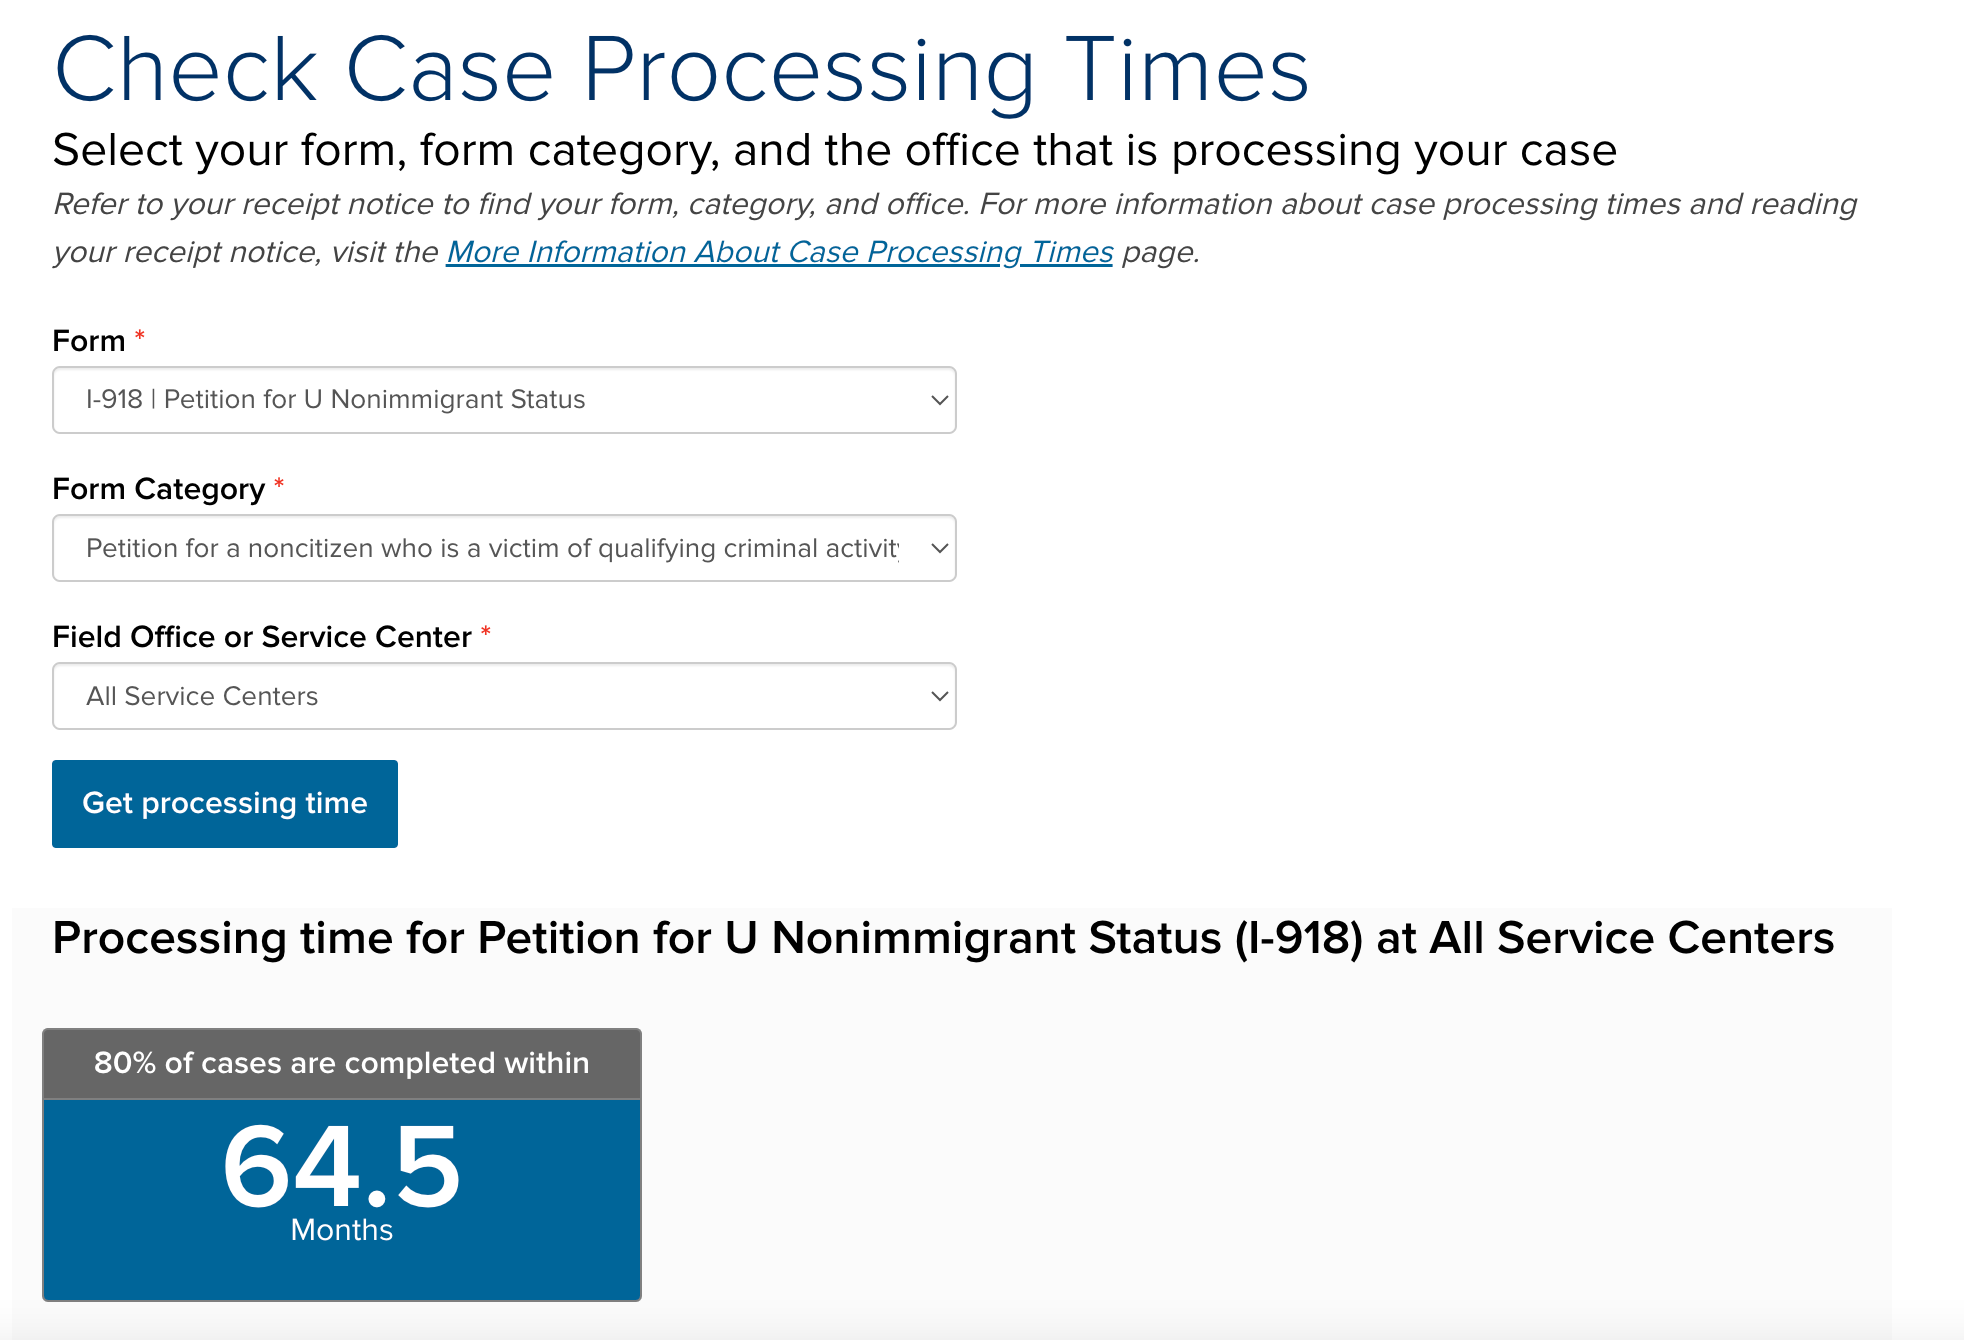 Case processing time for I-918 form (64.5 months)